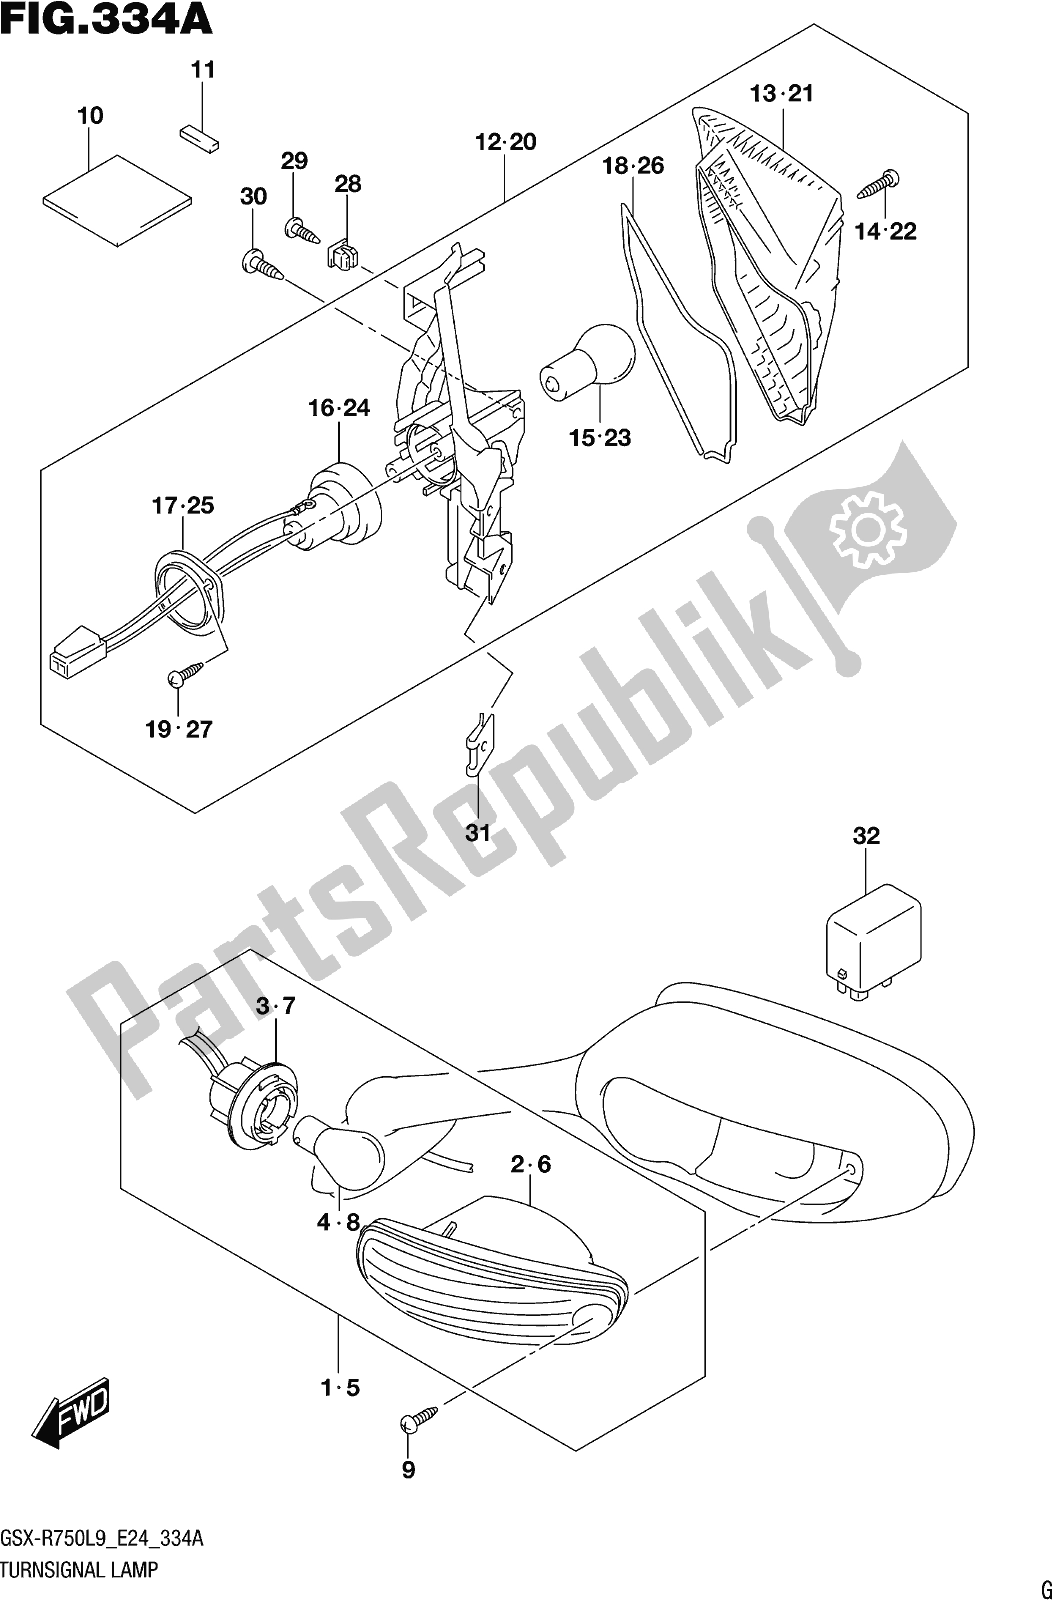 All parts for the Fig. 334a Turnsignal Lamp of the Suzuki Gsx-r 750 2019